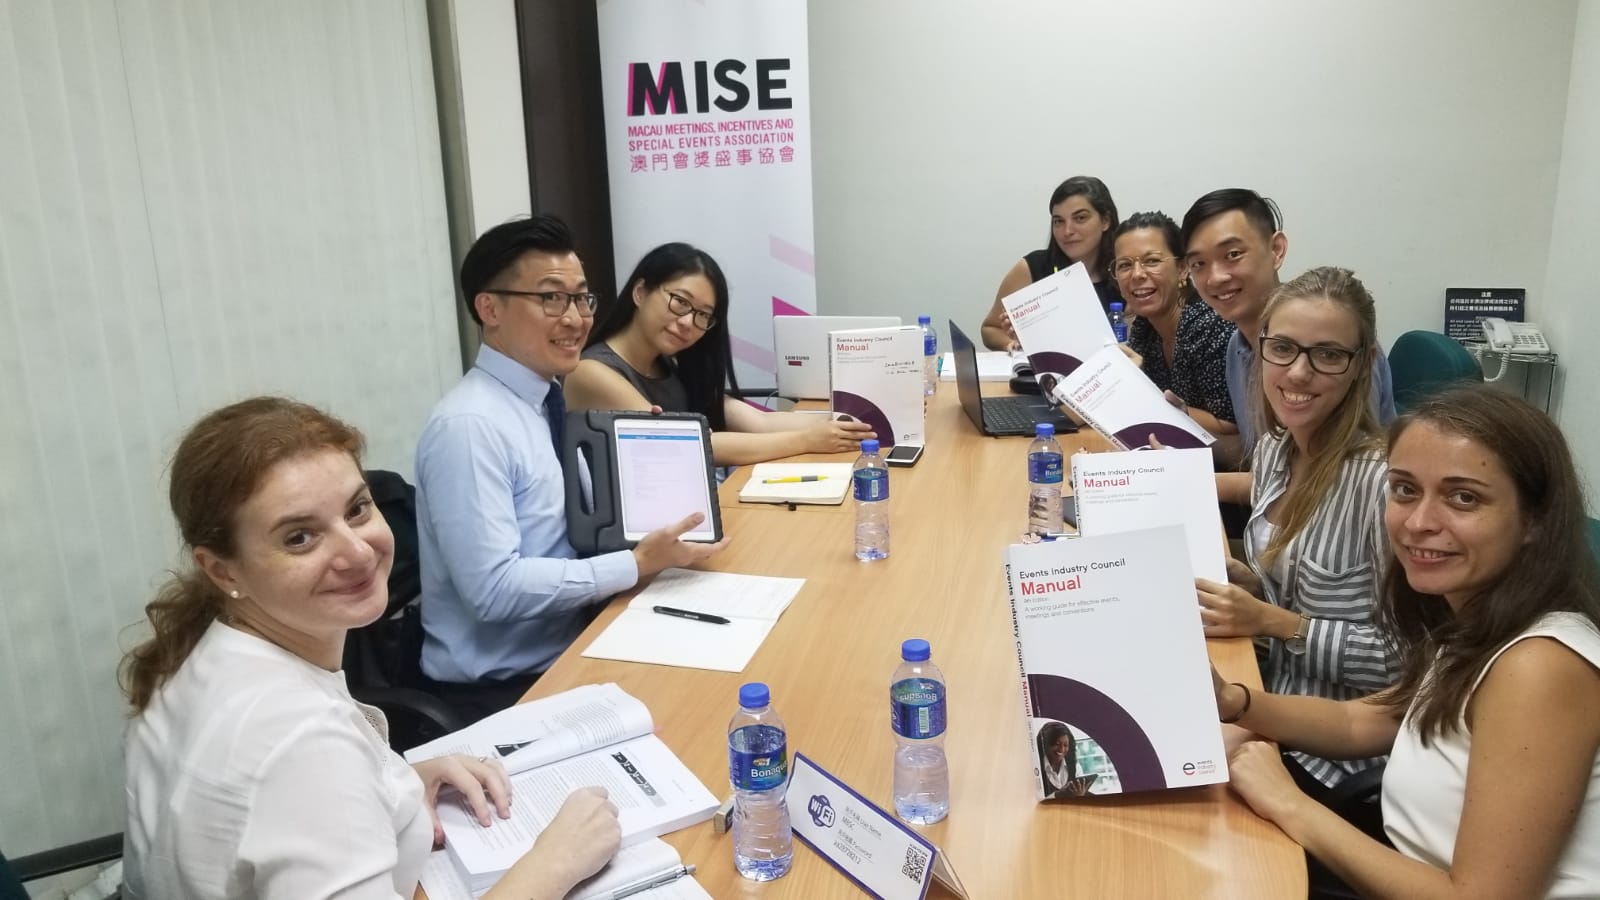 CMP STUDY GROUPS IN MACAU BY MISE – ON GOING